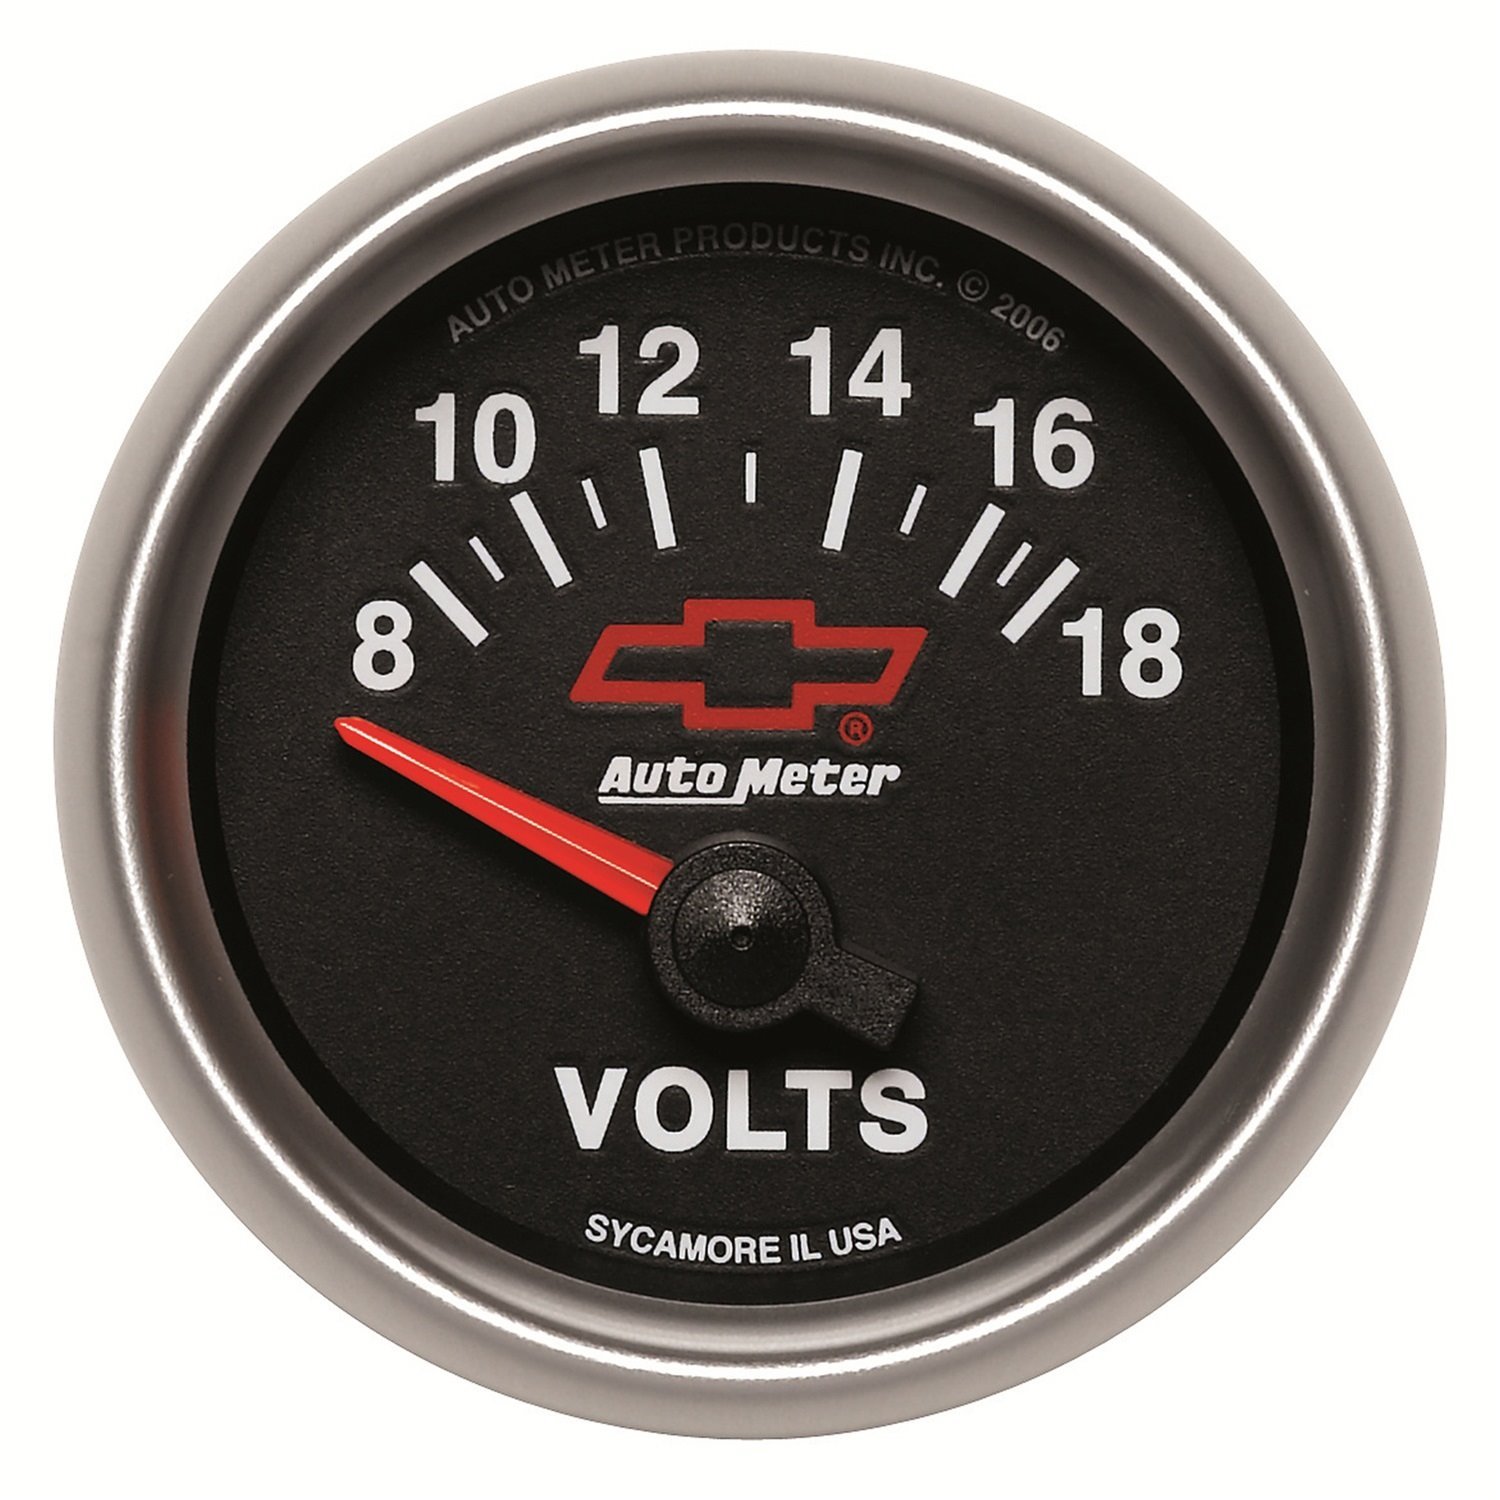 Officially Licensed Chevrolet Performance Voltmeter 2-1/16" Electrical